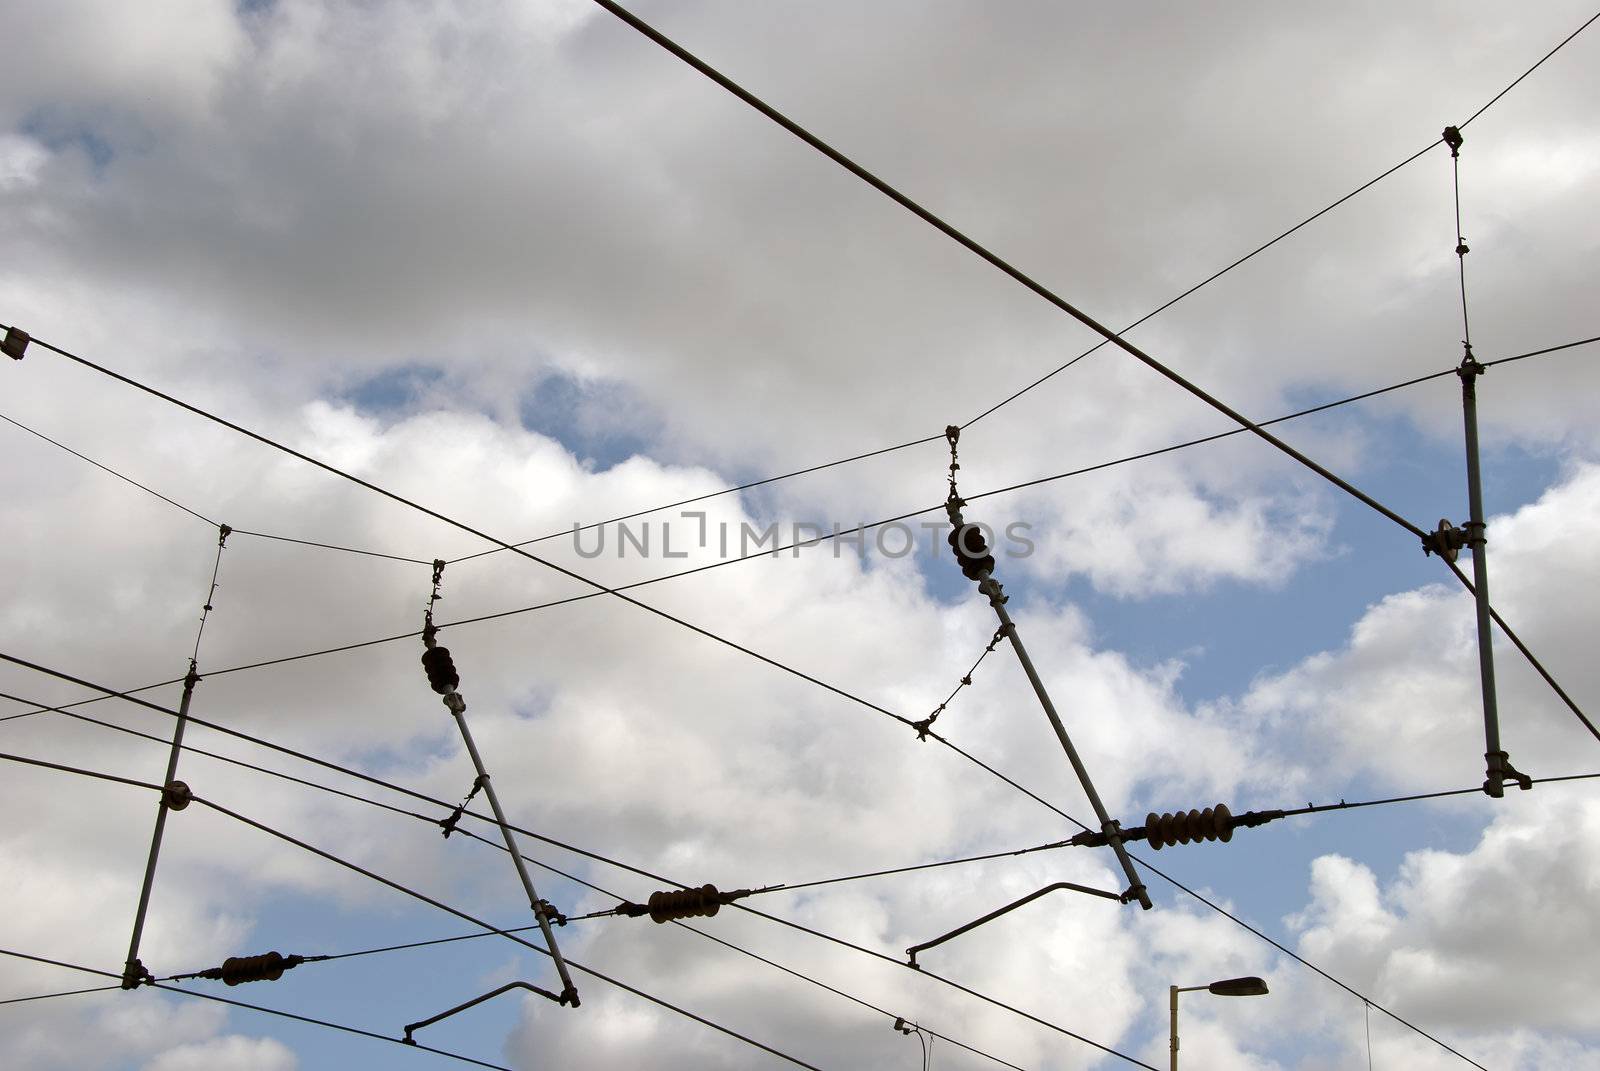 The overhead power cables of aa railway line in Yorkshire England against a blue sky